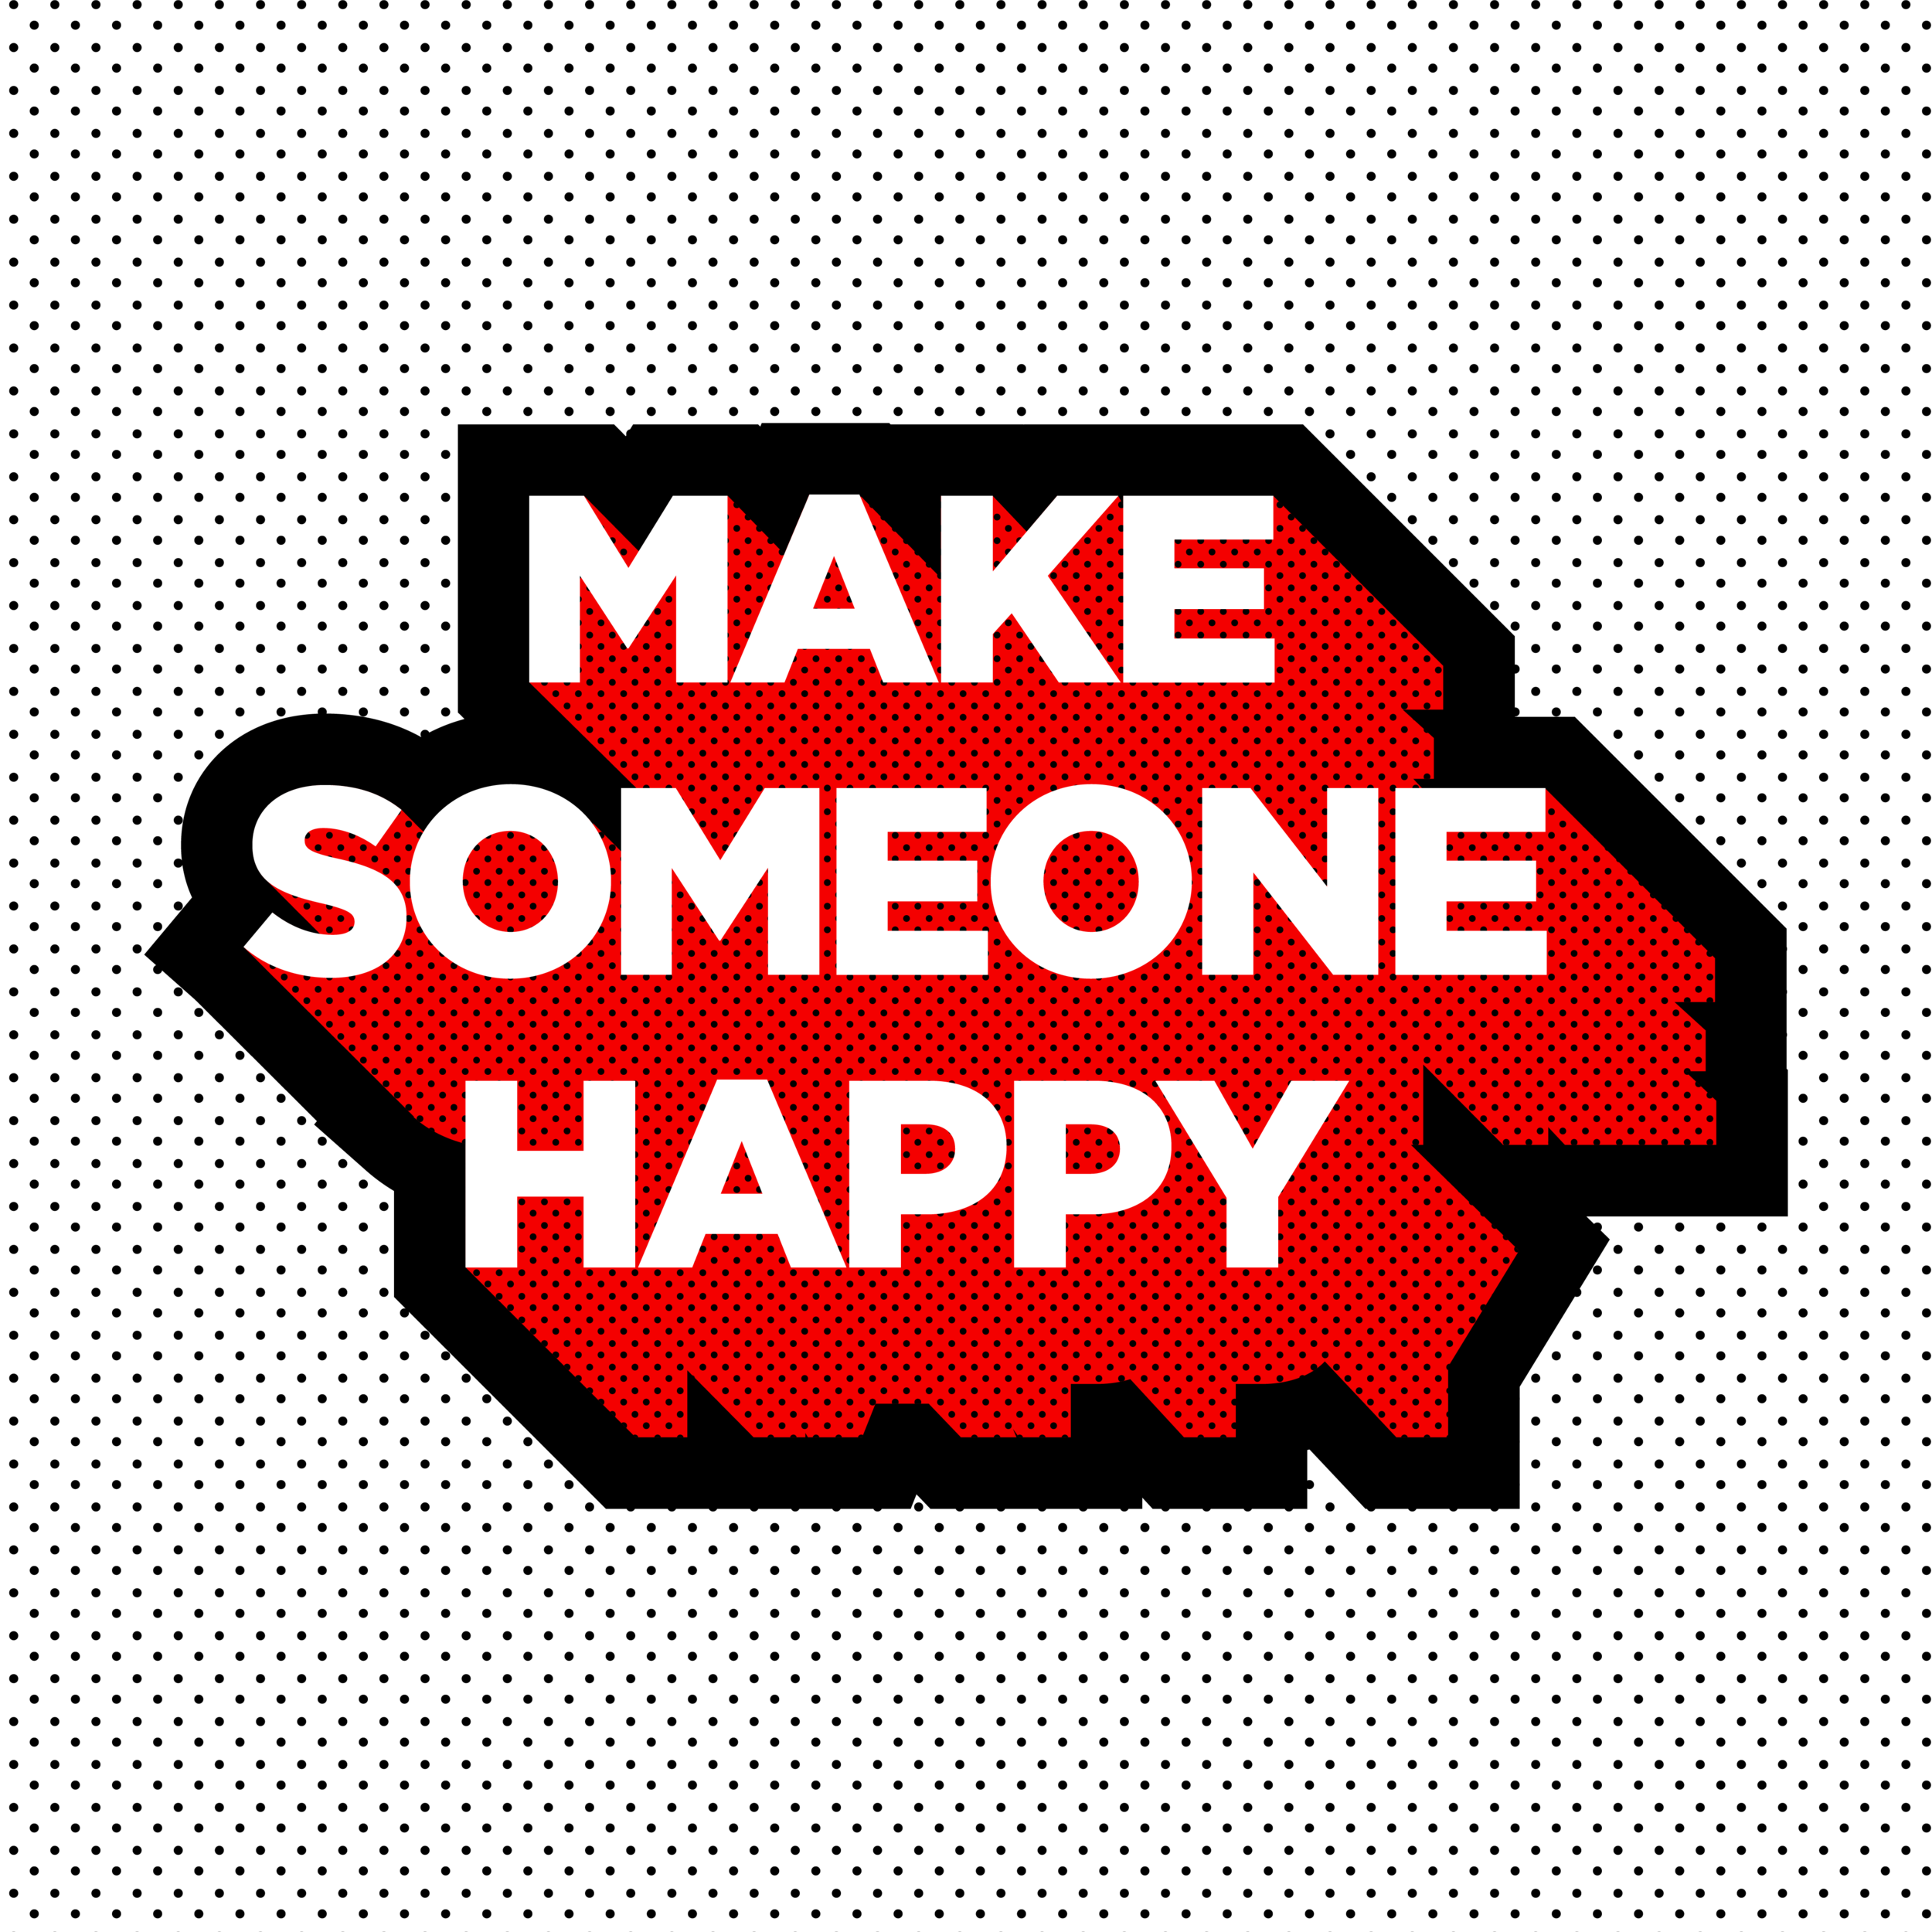 REFRESH_THE_FEED-make_someone_happy.png